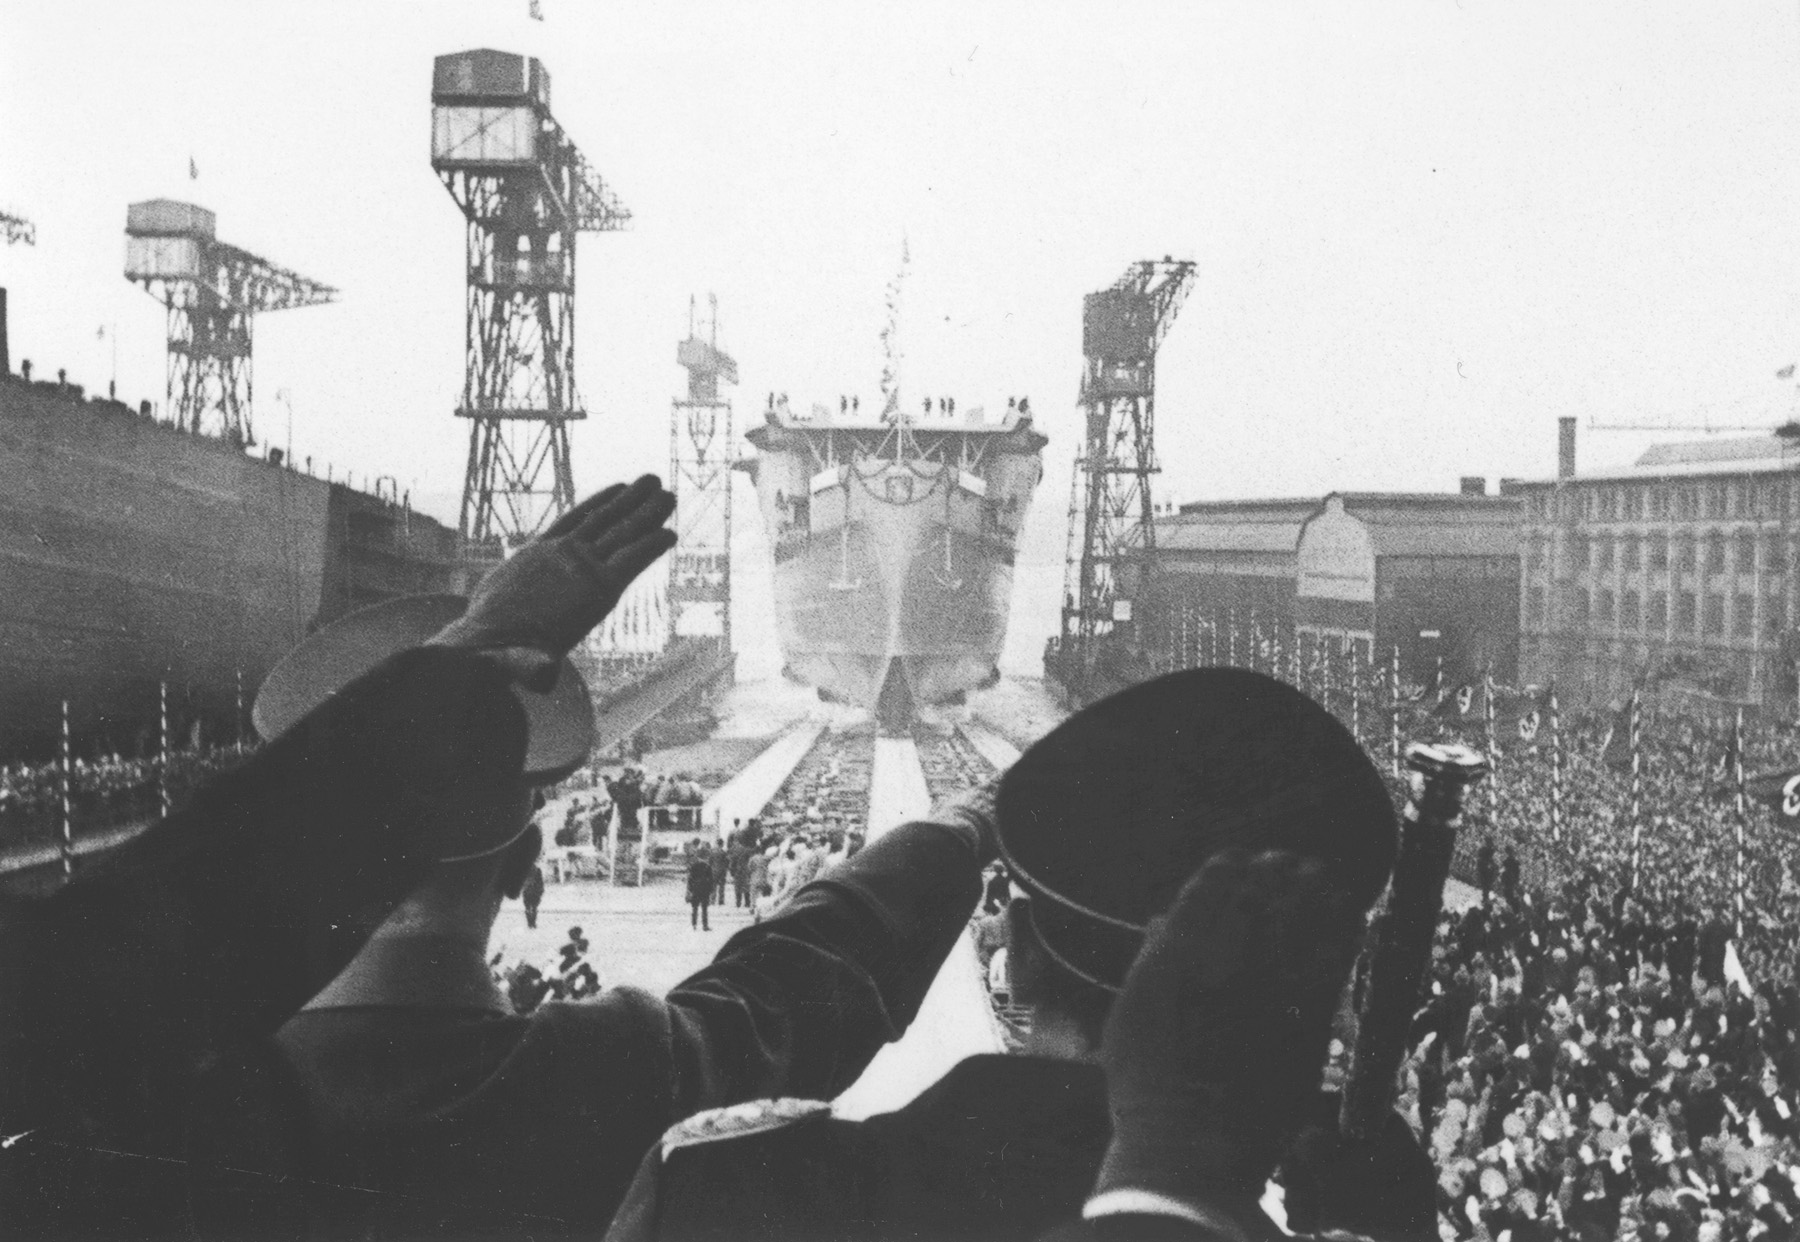 Chancellor Adolf Hitler and Reichsmarshal Hermann Göring salute as Graf Zeppelin is launched at Kiel’s Germania shipyard.